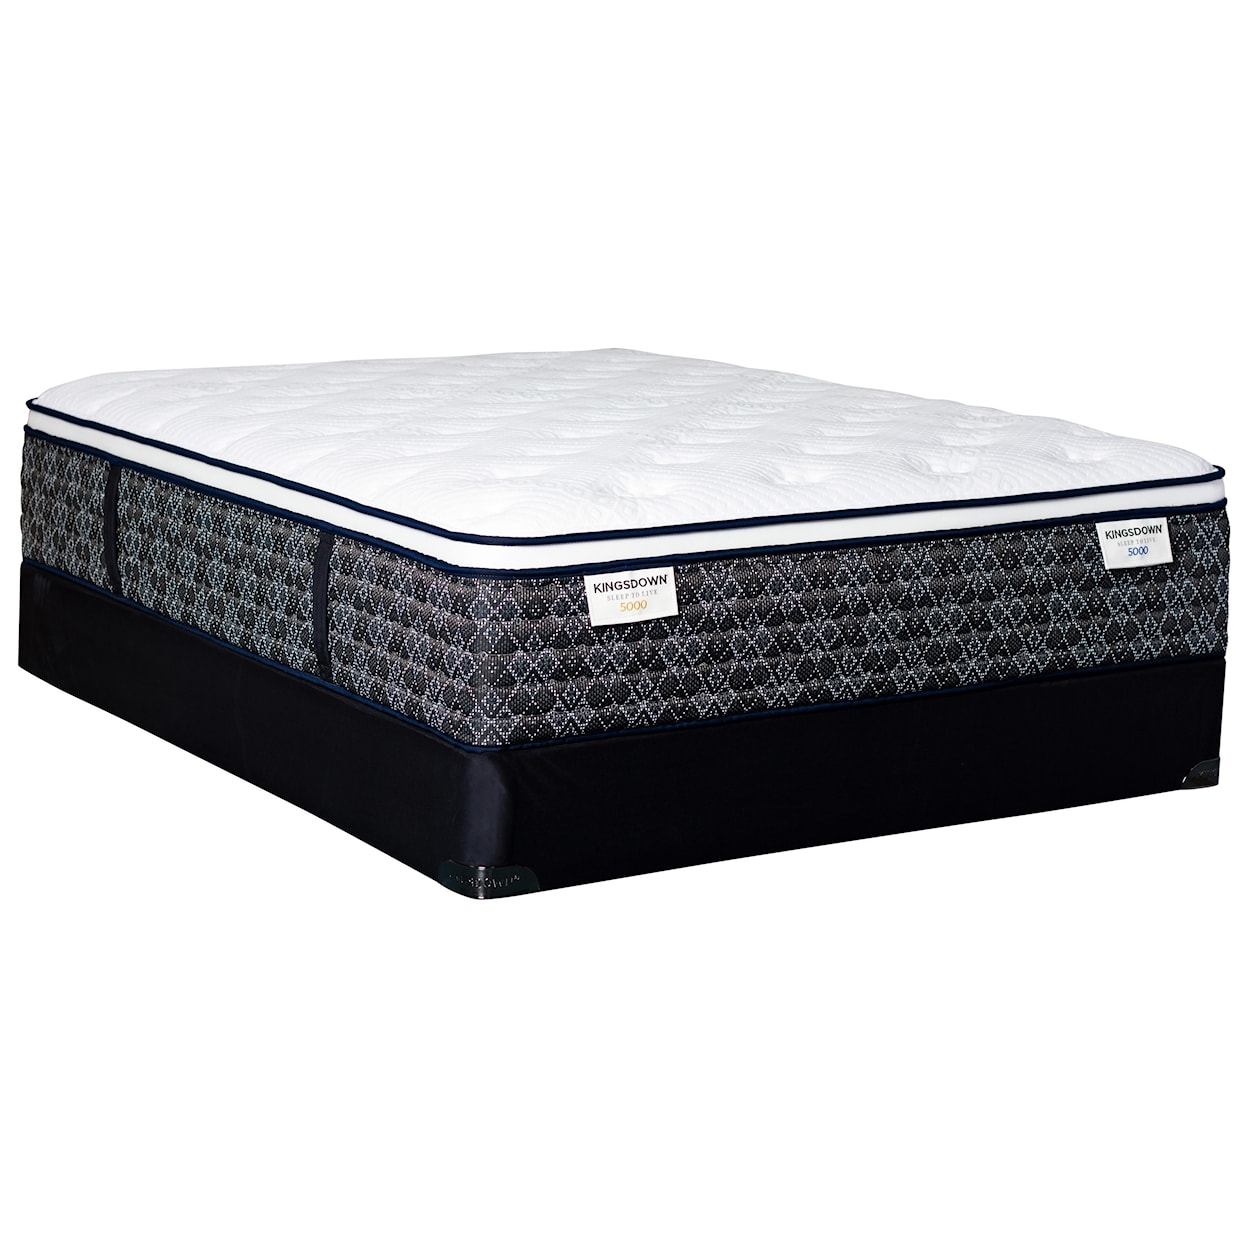 Kingsdown Sleep to Live 5000 Green Red ET Full Pocketed Coil Mattress LoPro Set